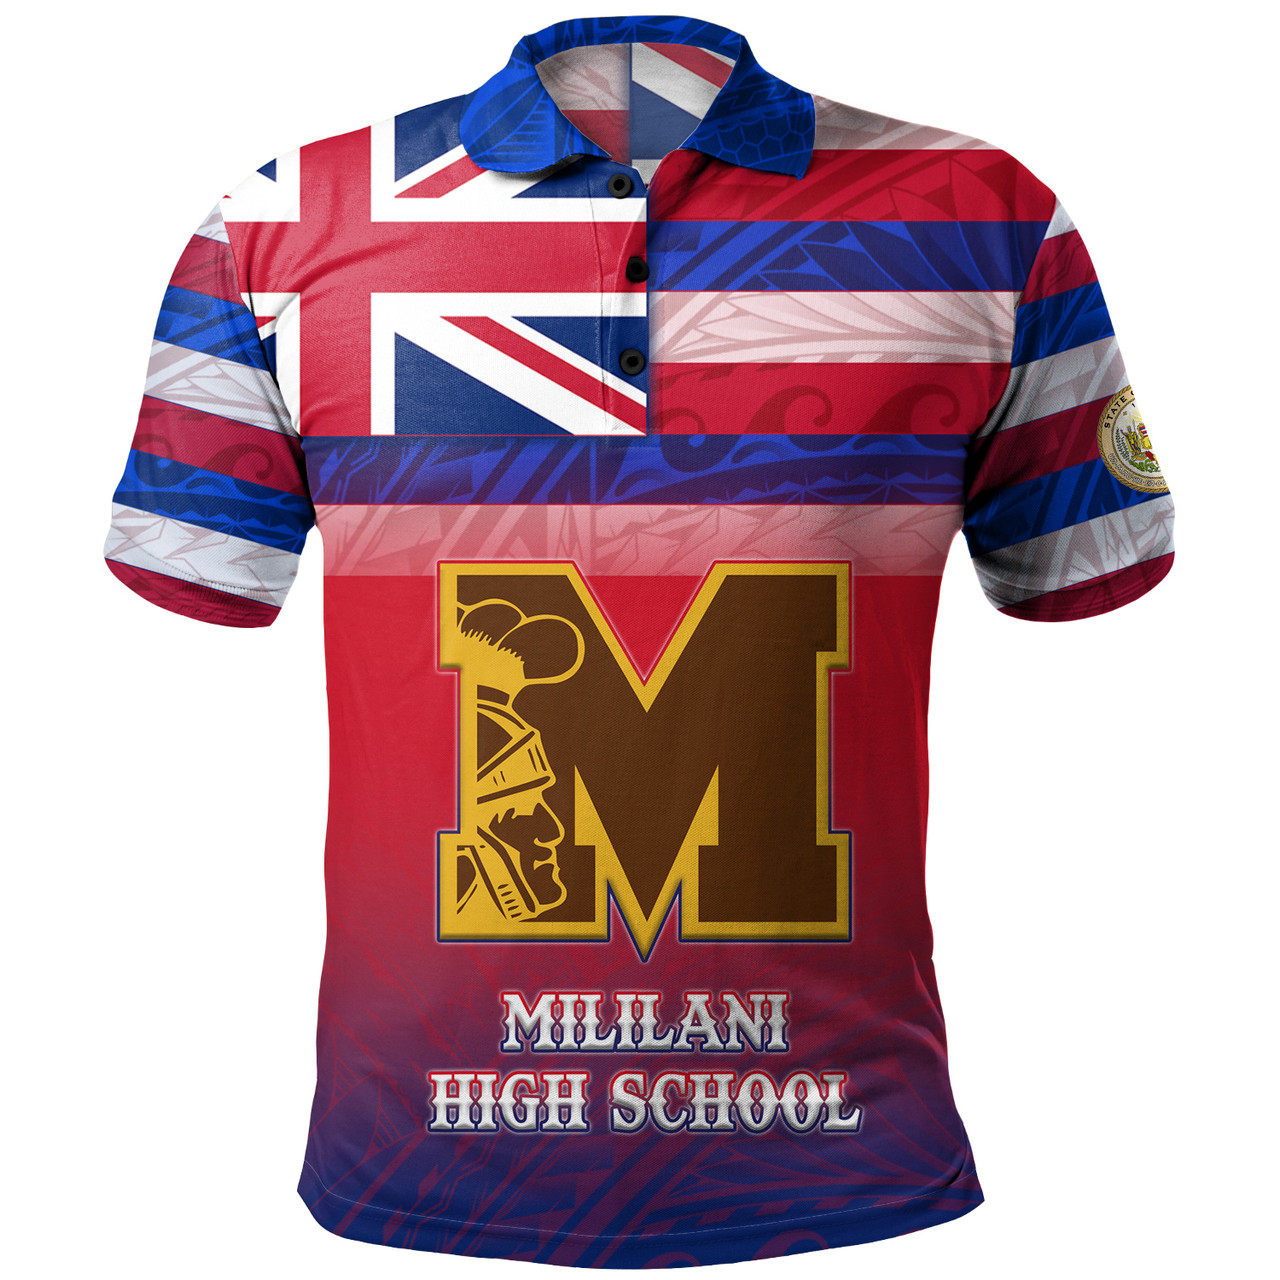 Hawaii Mililani High School Polo Shirt Flag Color With Traditional Patterns